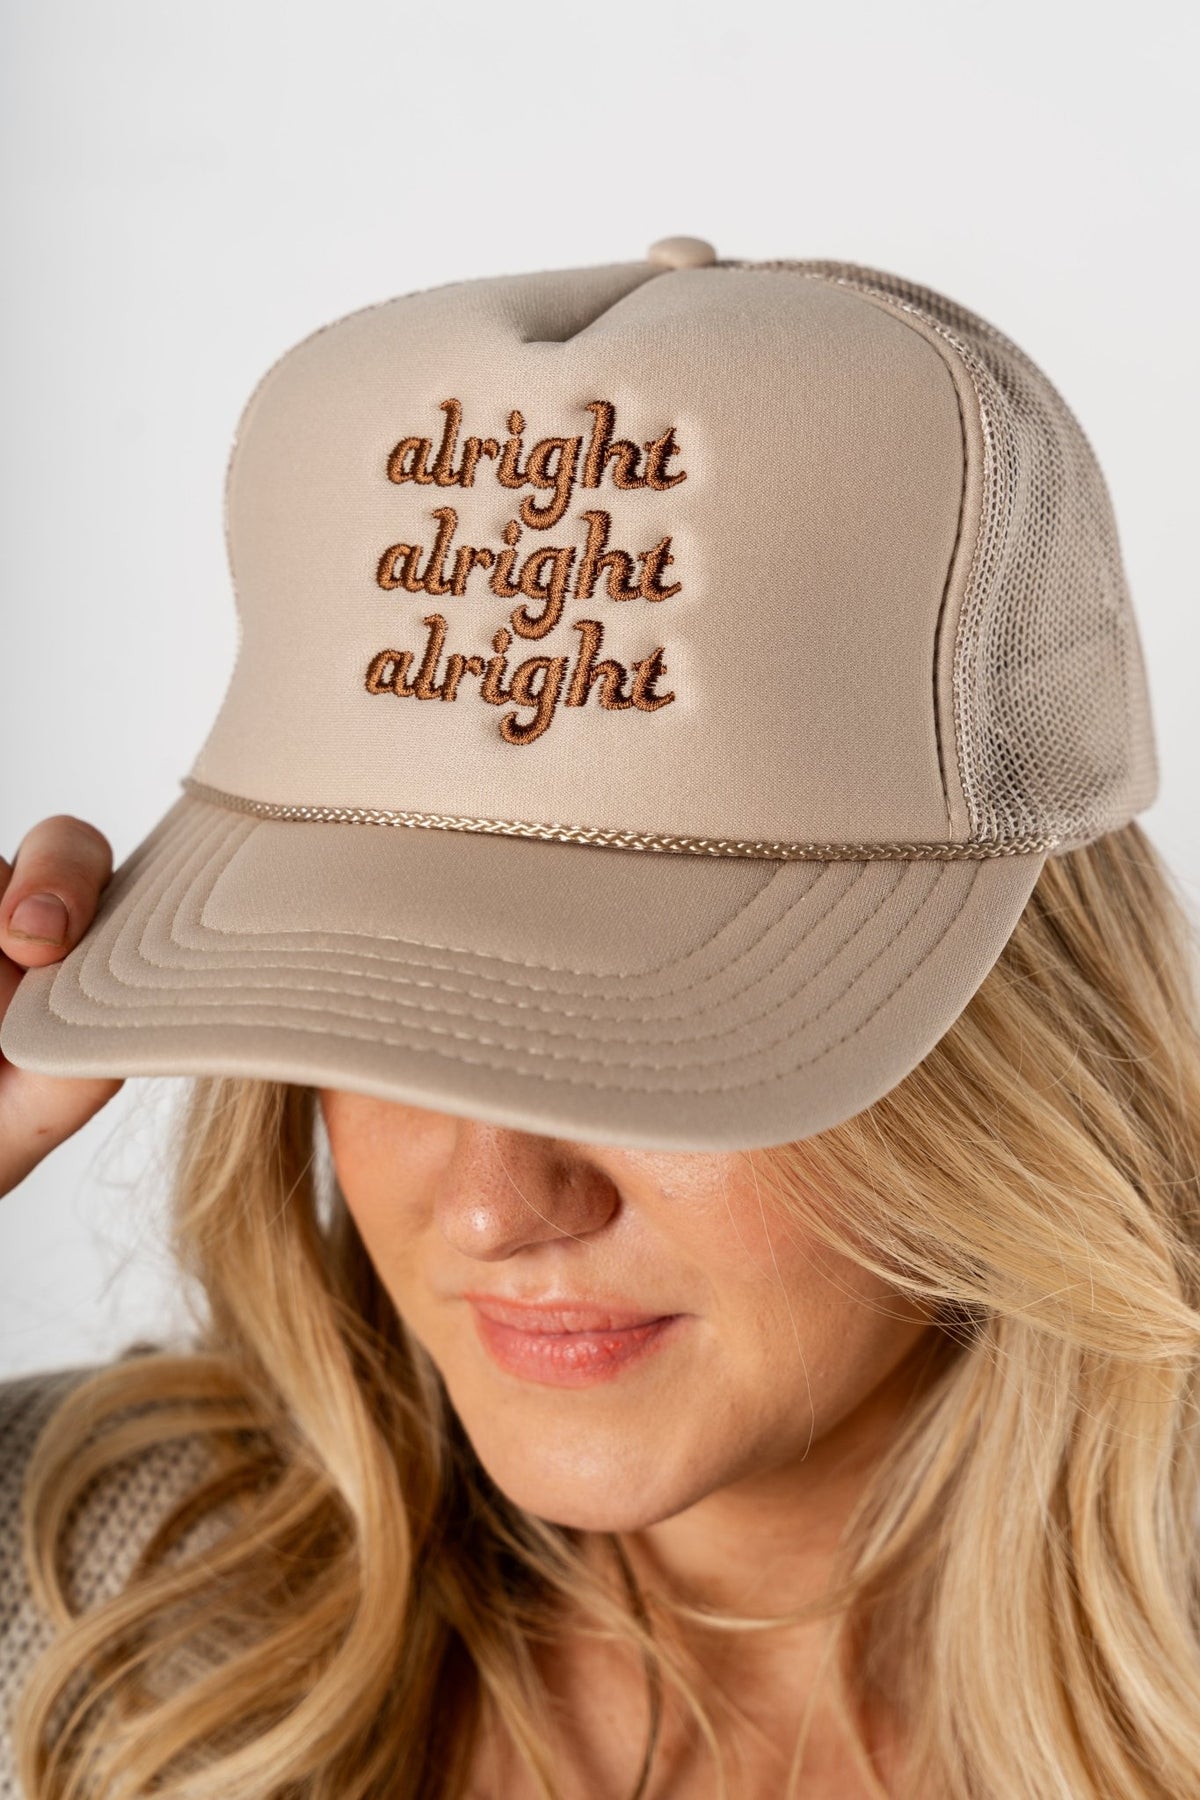 Alright alright alright trucker hat khaki - Trendy Hats at Lush Fashion Lounge Boutique in Oklahoma City